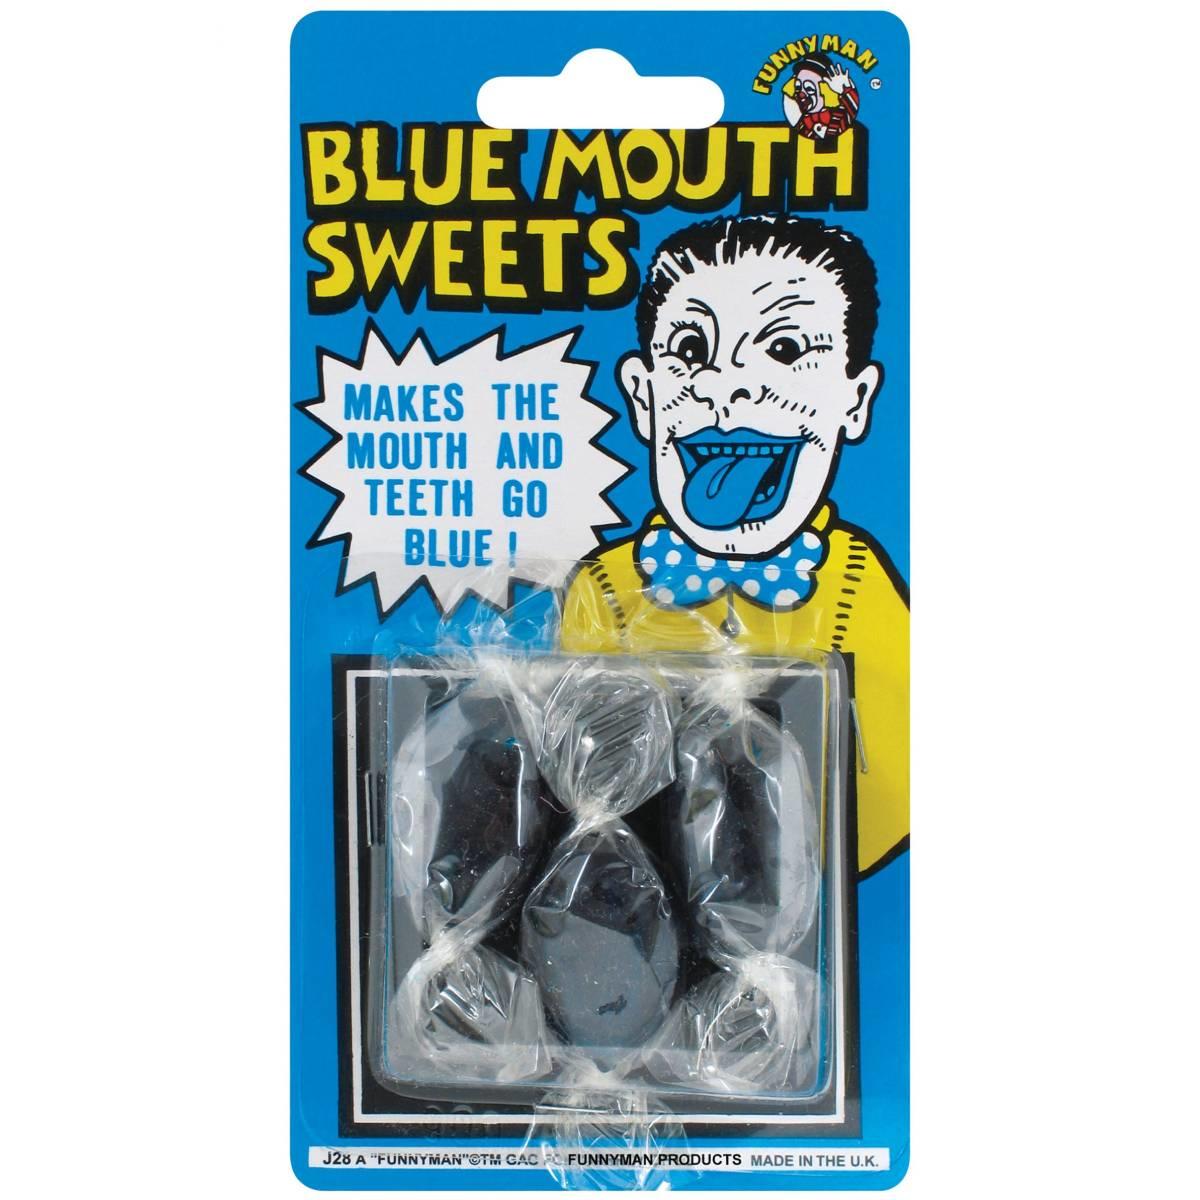 Blue Mouth Sweets pk3 by Funnyman J28 / GJ450 available here at Karnival Costumes online party shop